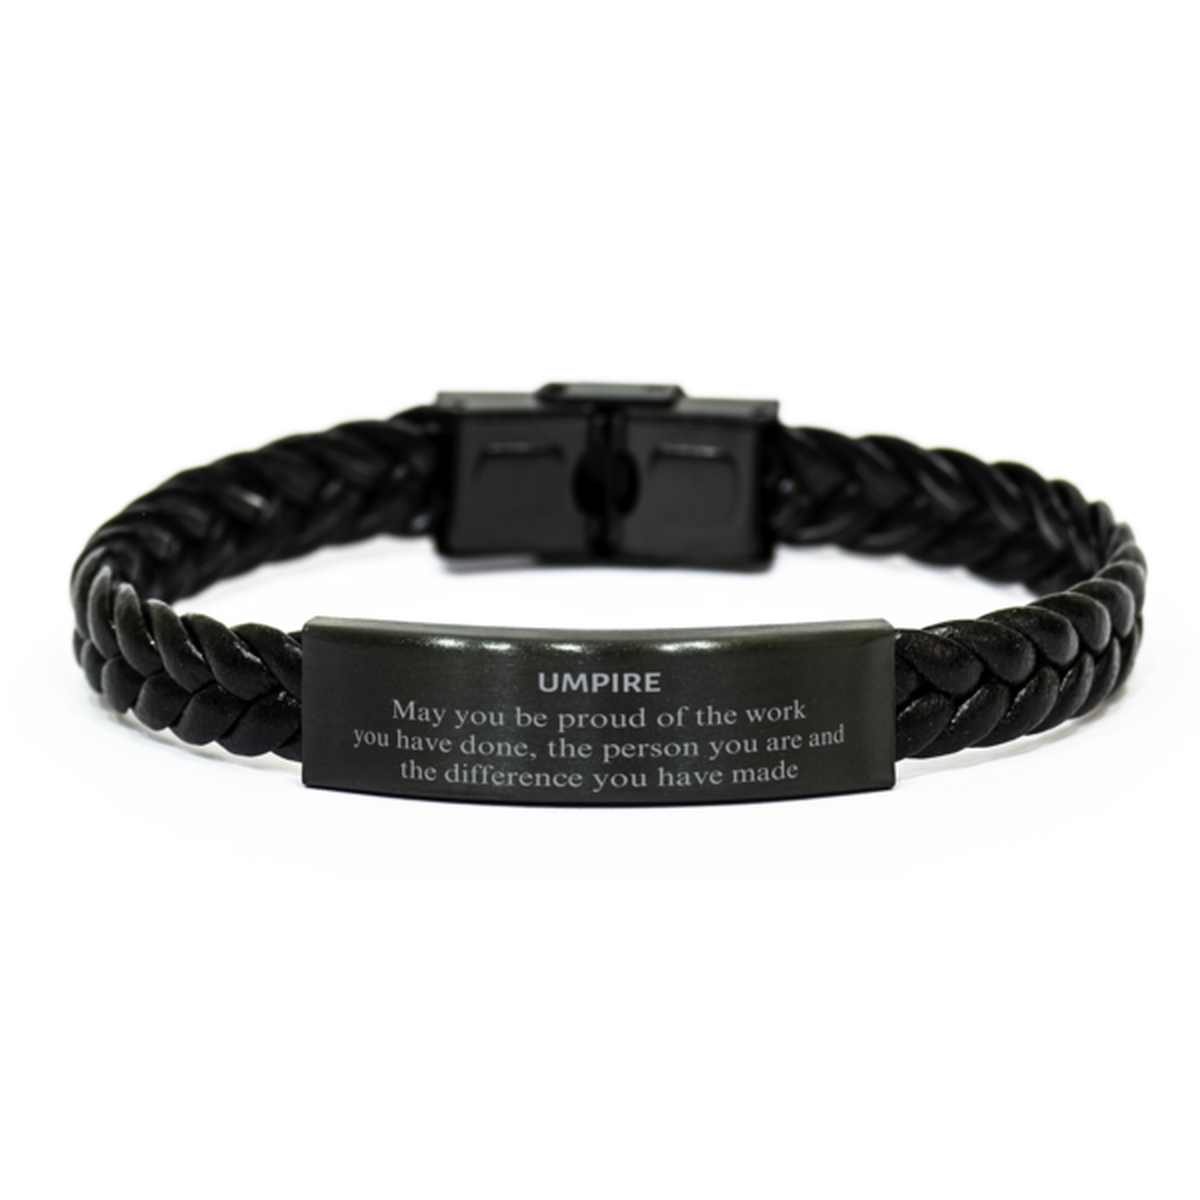 Umpire May you be proud of the work you have done, Retirement Umpire Braided Leather Bracelet for Colleague Appreciation Gifts Amazing for Umpire